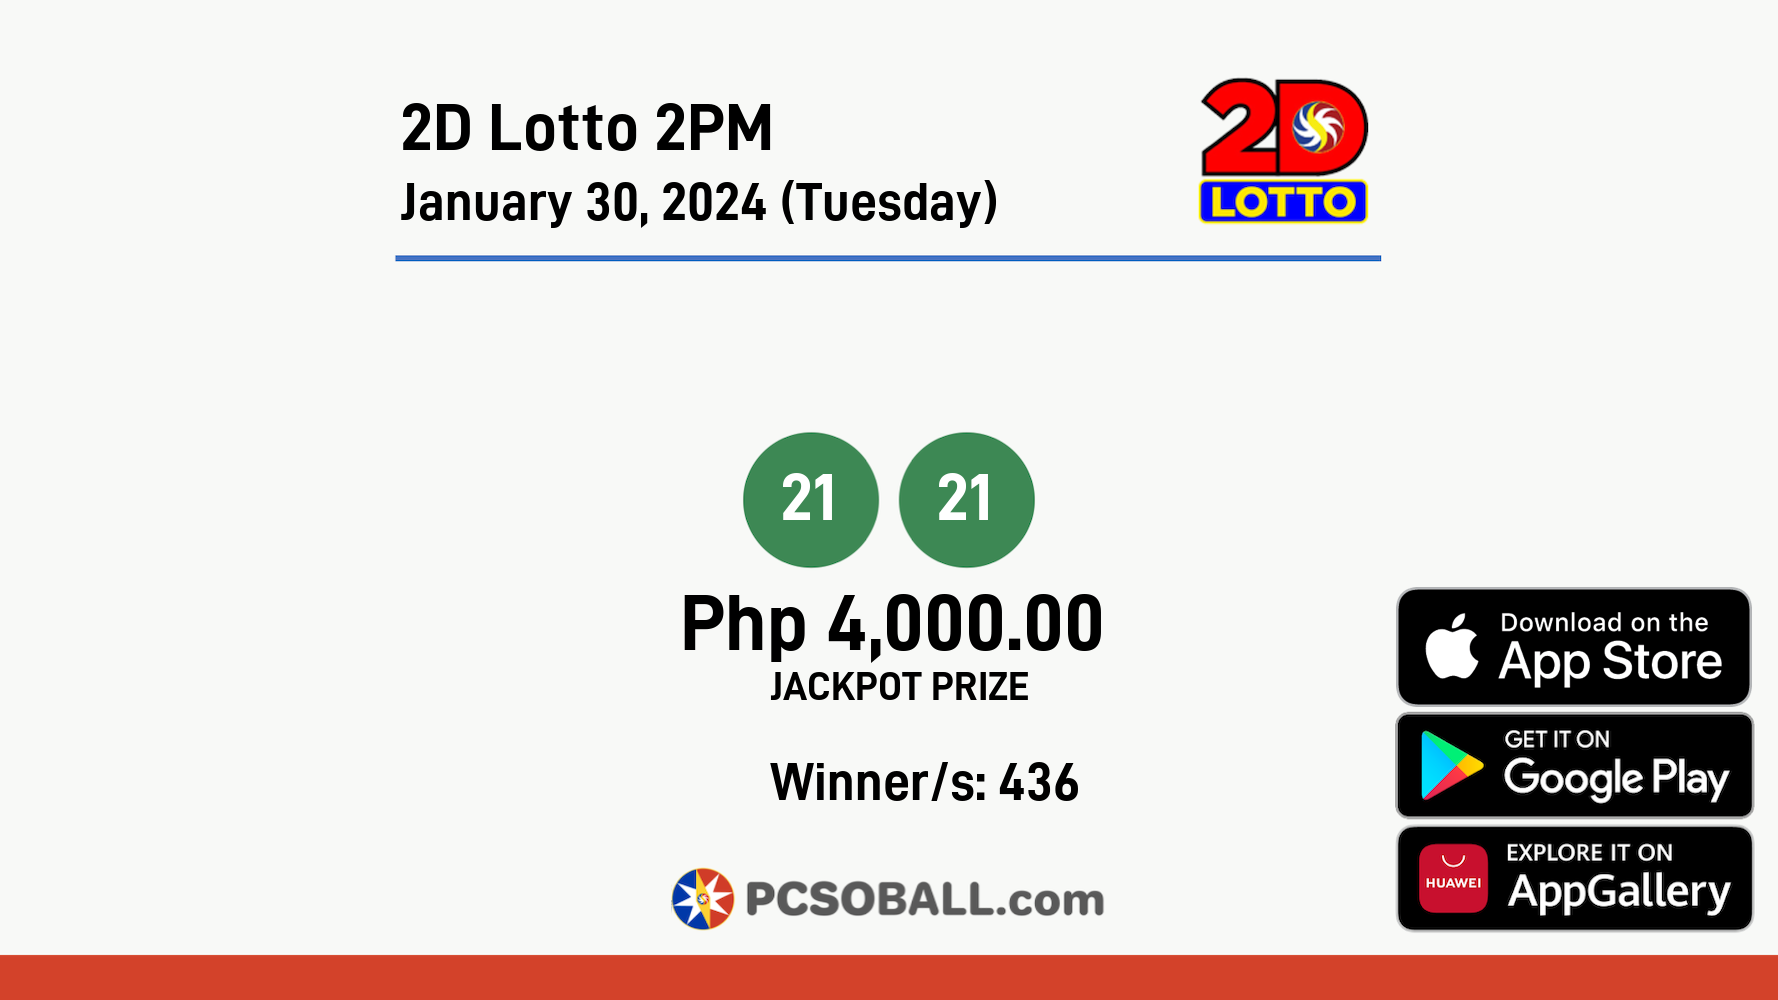 2D Lotto 2PM January 30, 2024 (Tuesday) Result